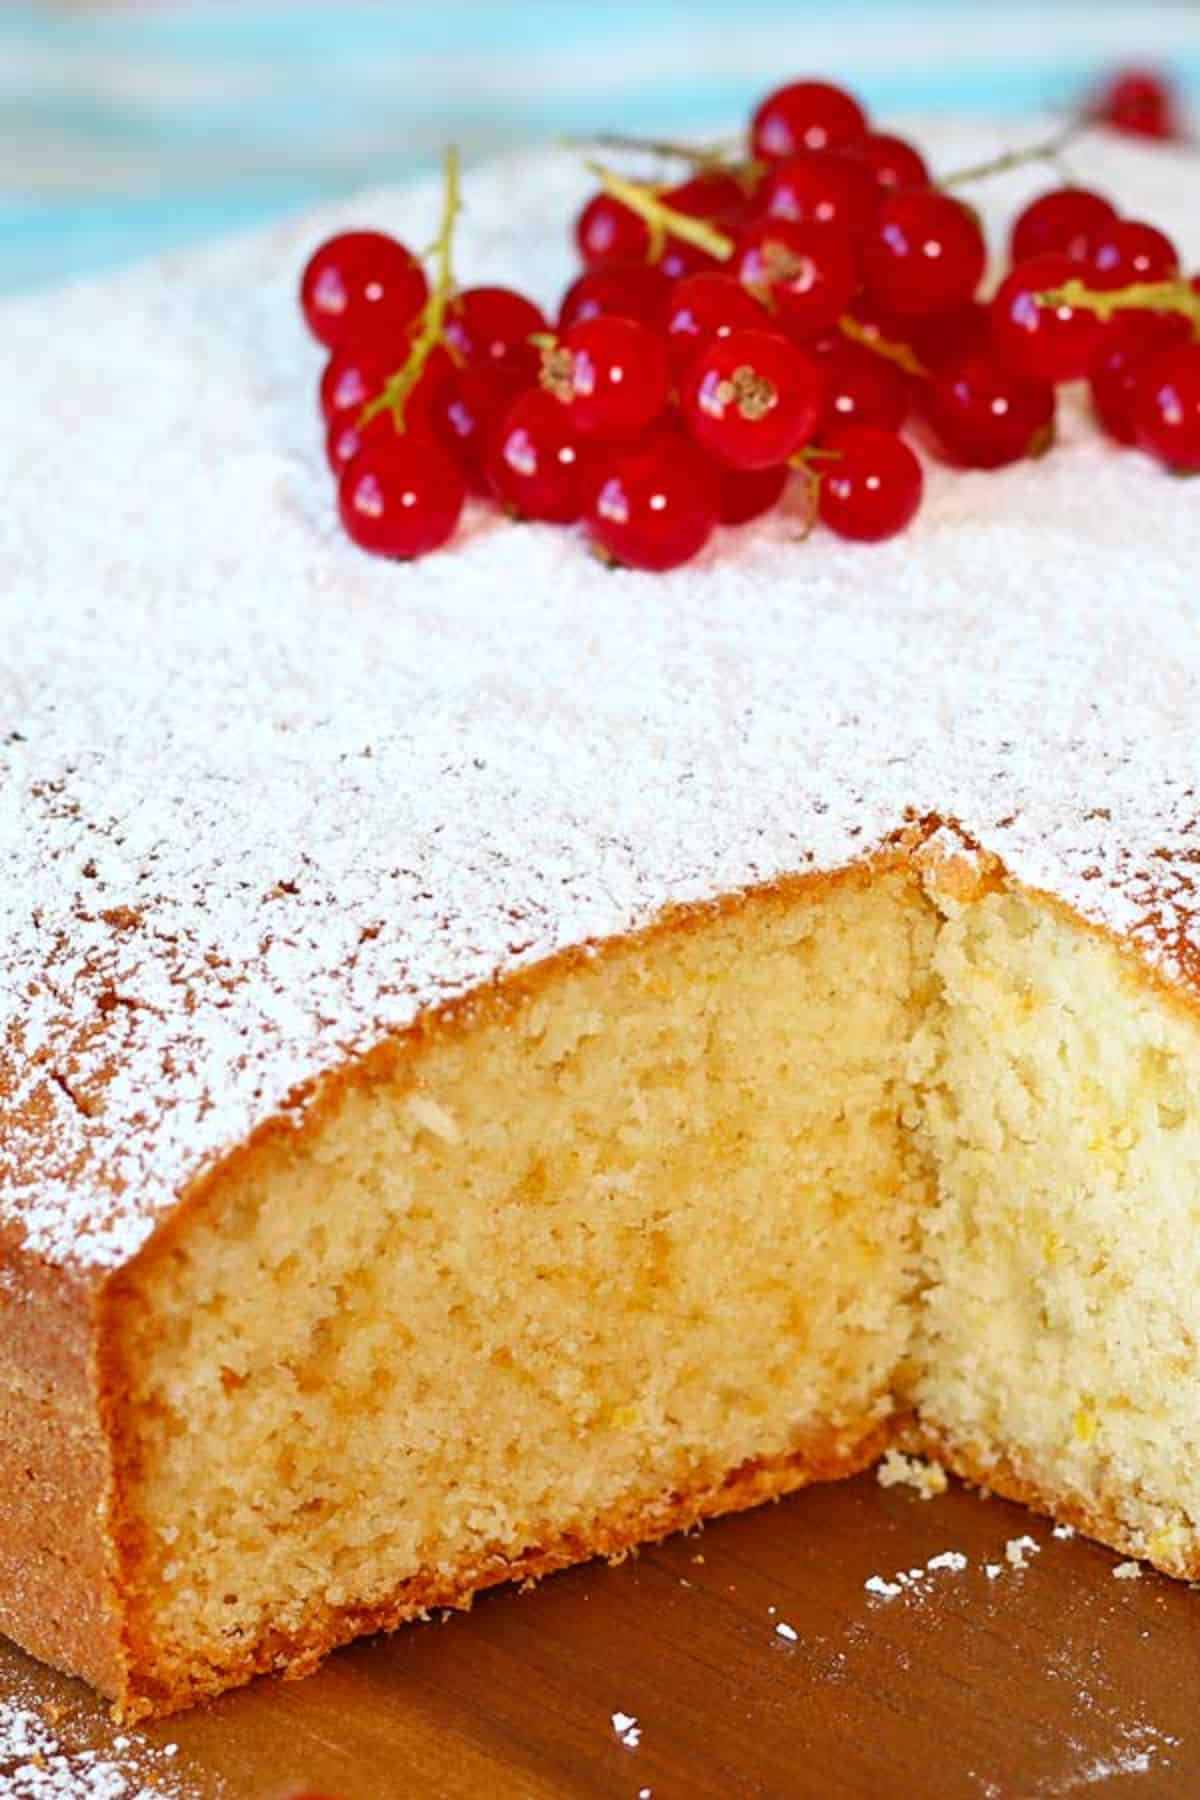 Scrumptious lemon yogurt cake in a wooden tray garnished with currants.